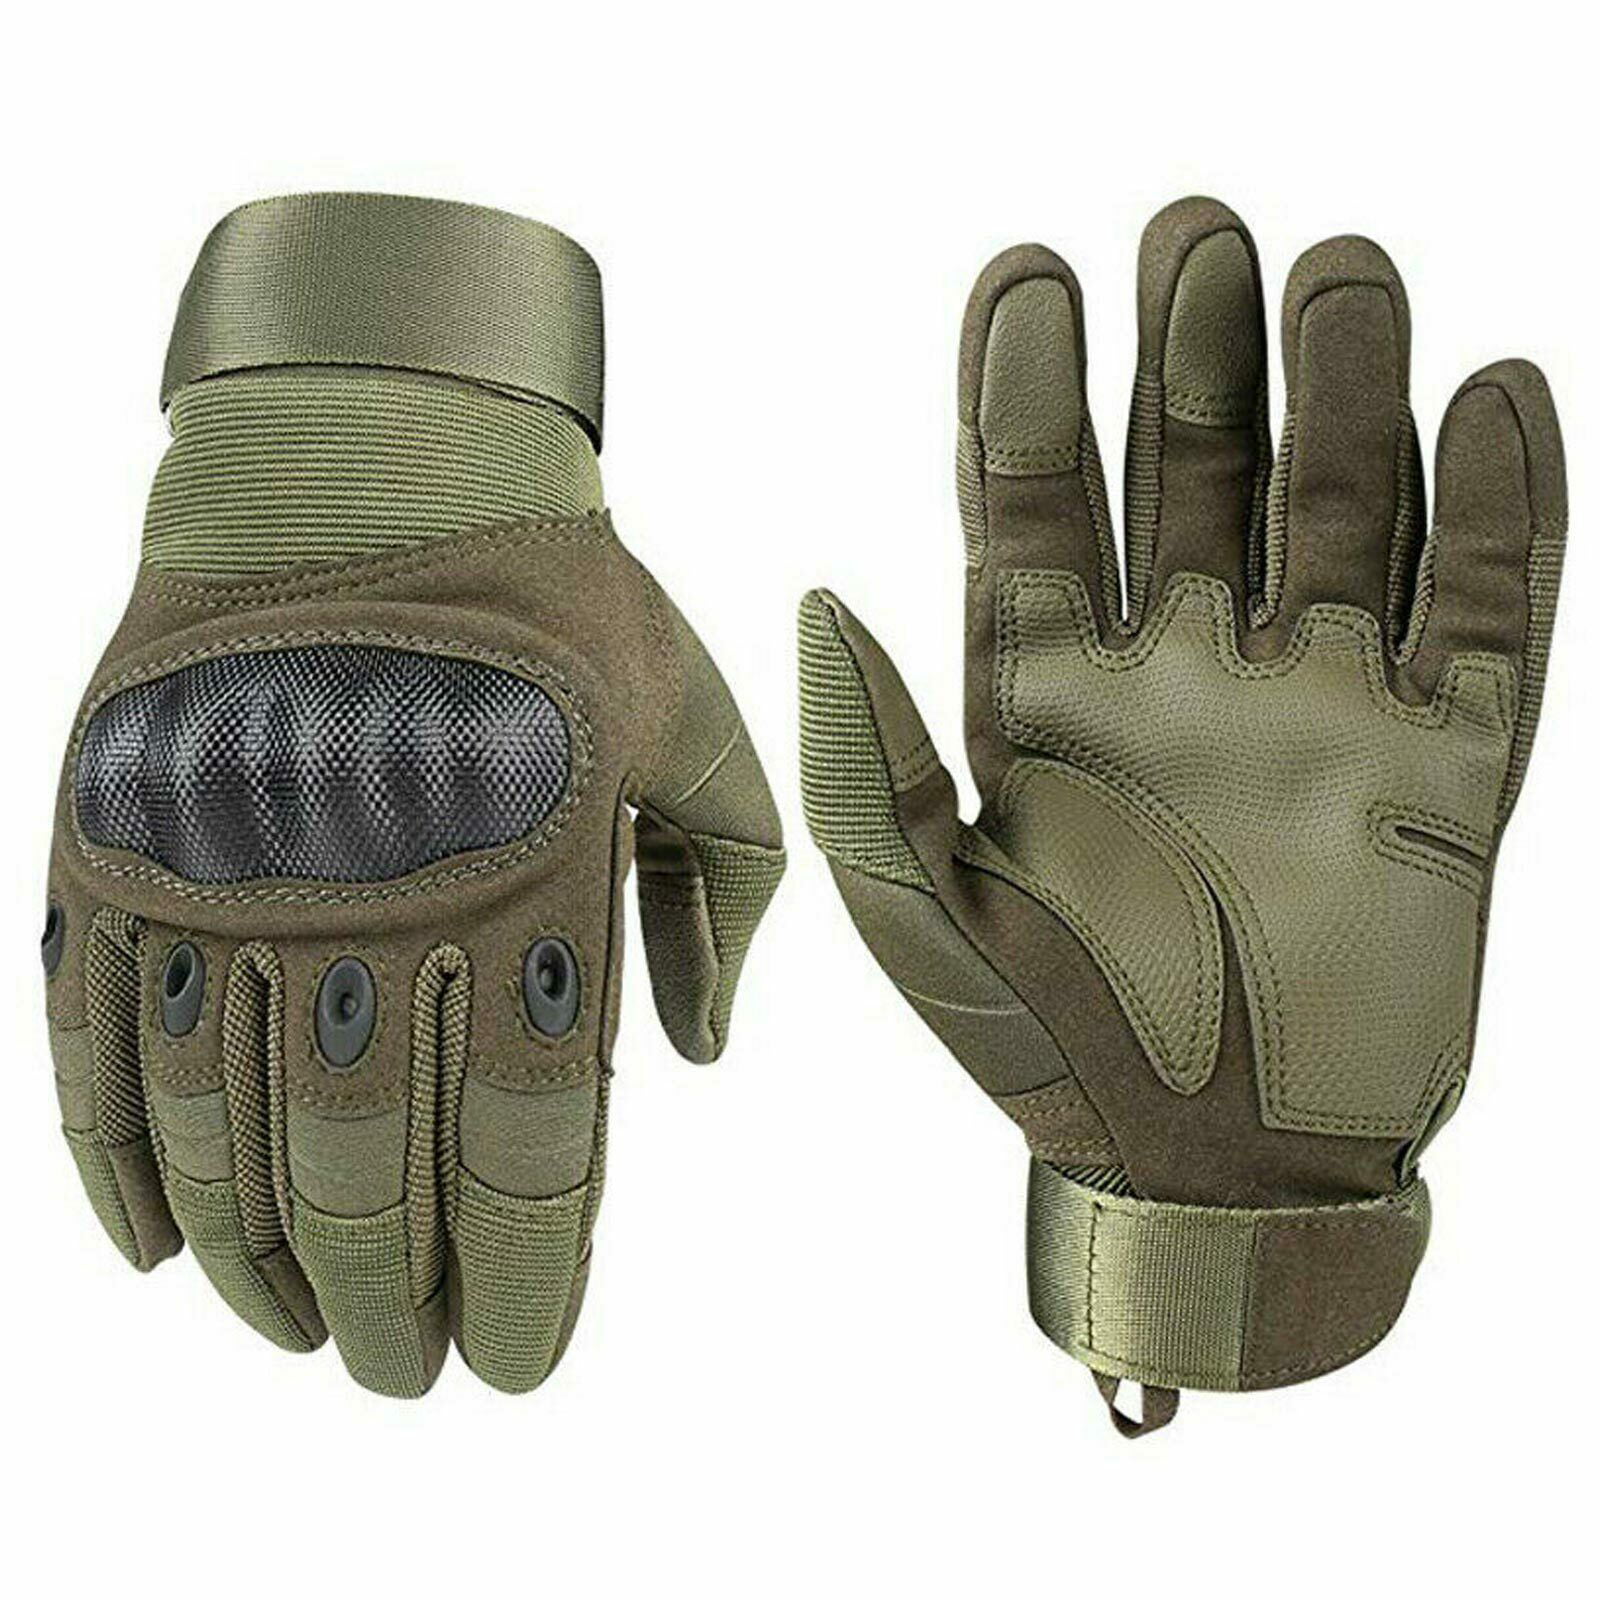 Motorcycle Gloves Full Finger Army Tactical Motorbike Hiking Outdoor Sports